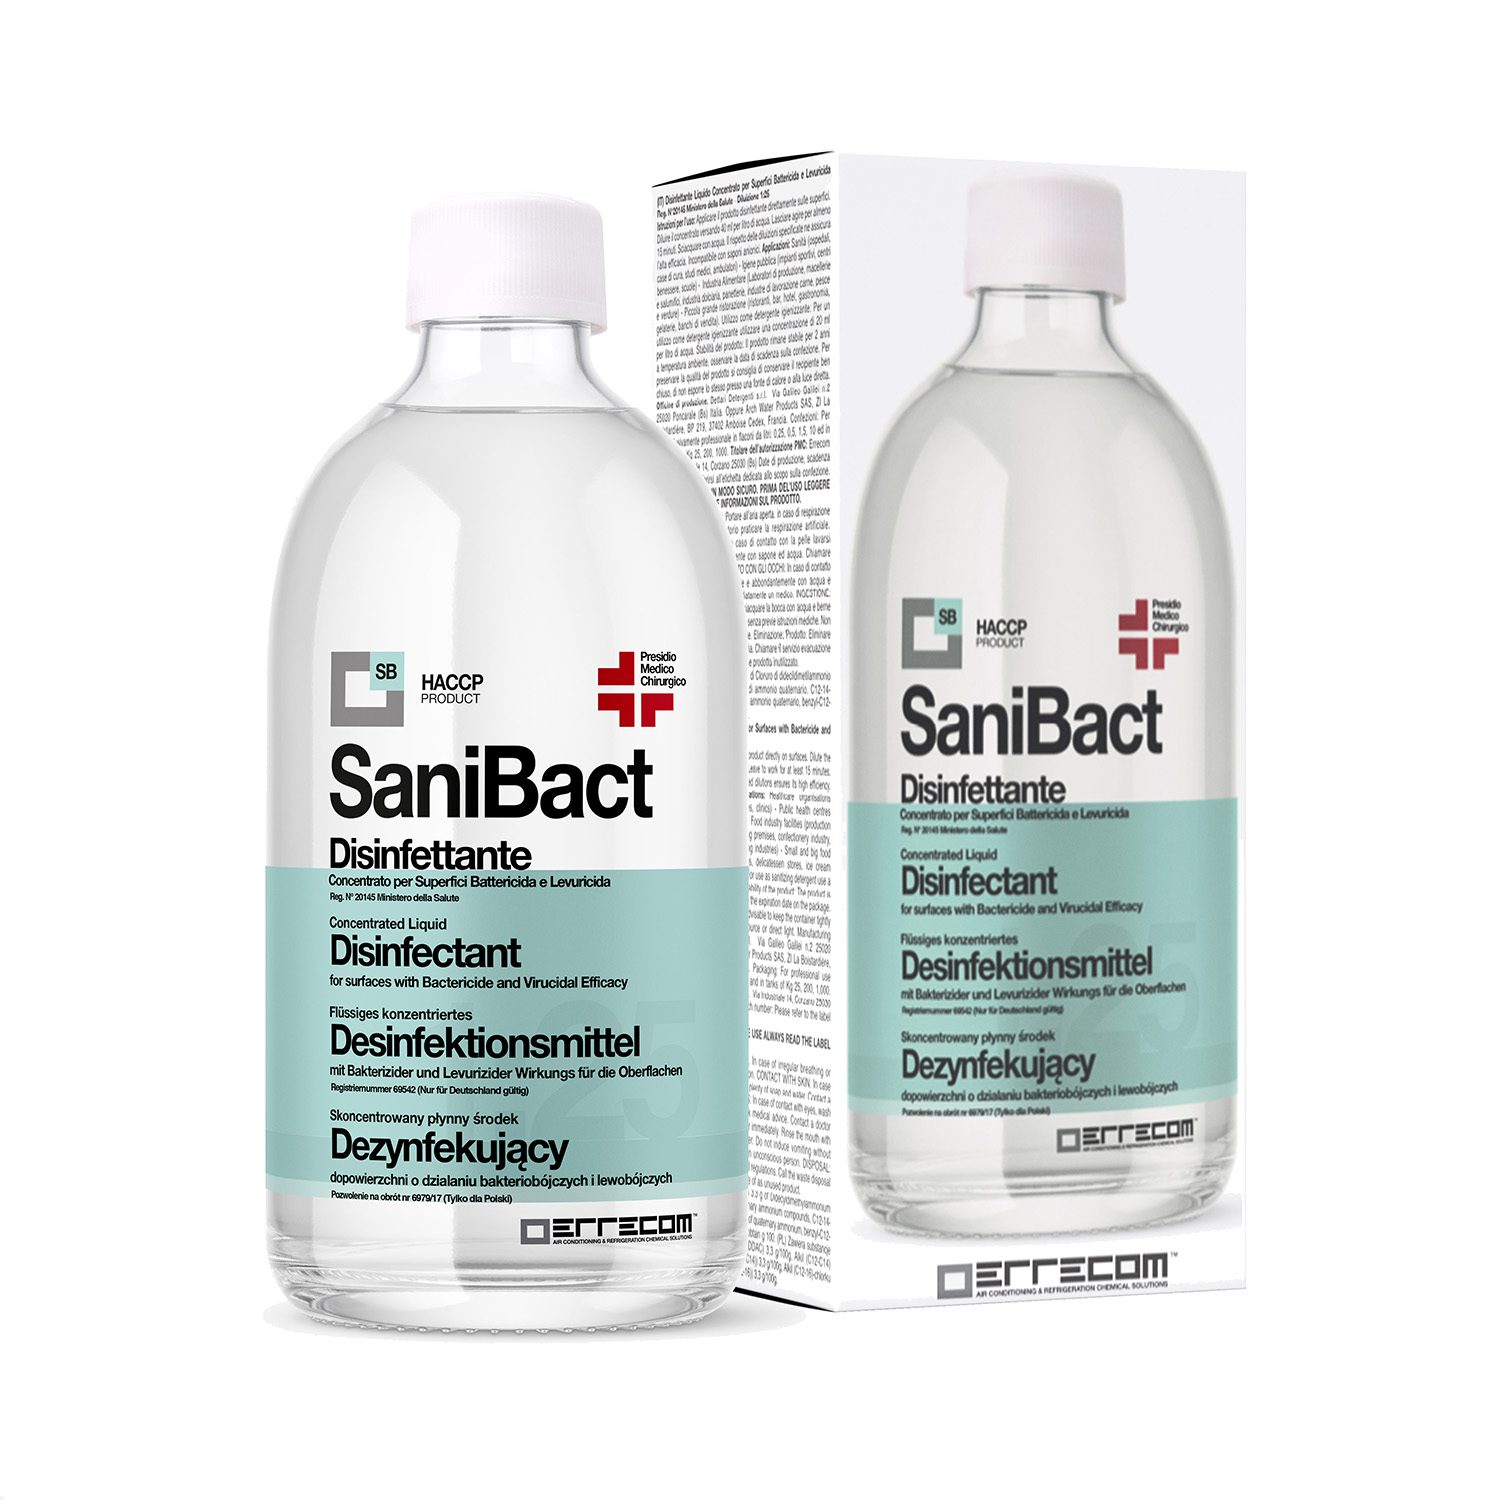 Liquid Disinfectant for Surfaces with Bactericide and Virucidal Efficacy (biocide) - SANIBACT - Container 500 ml.